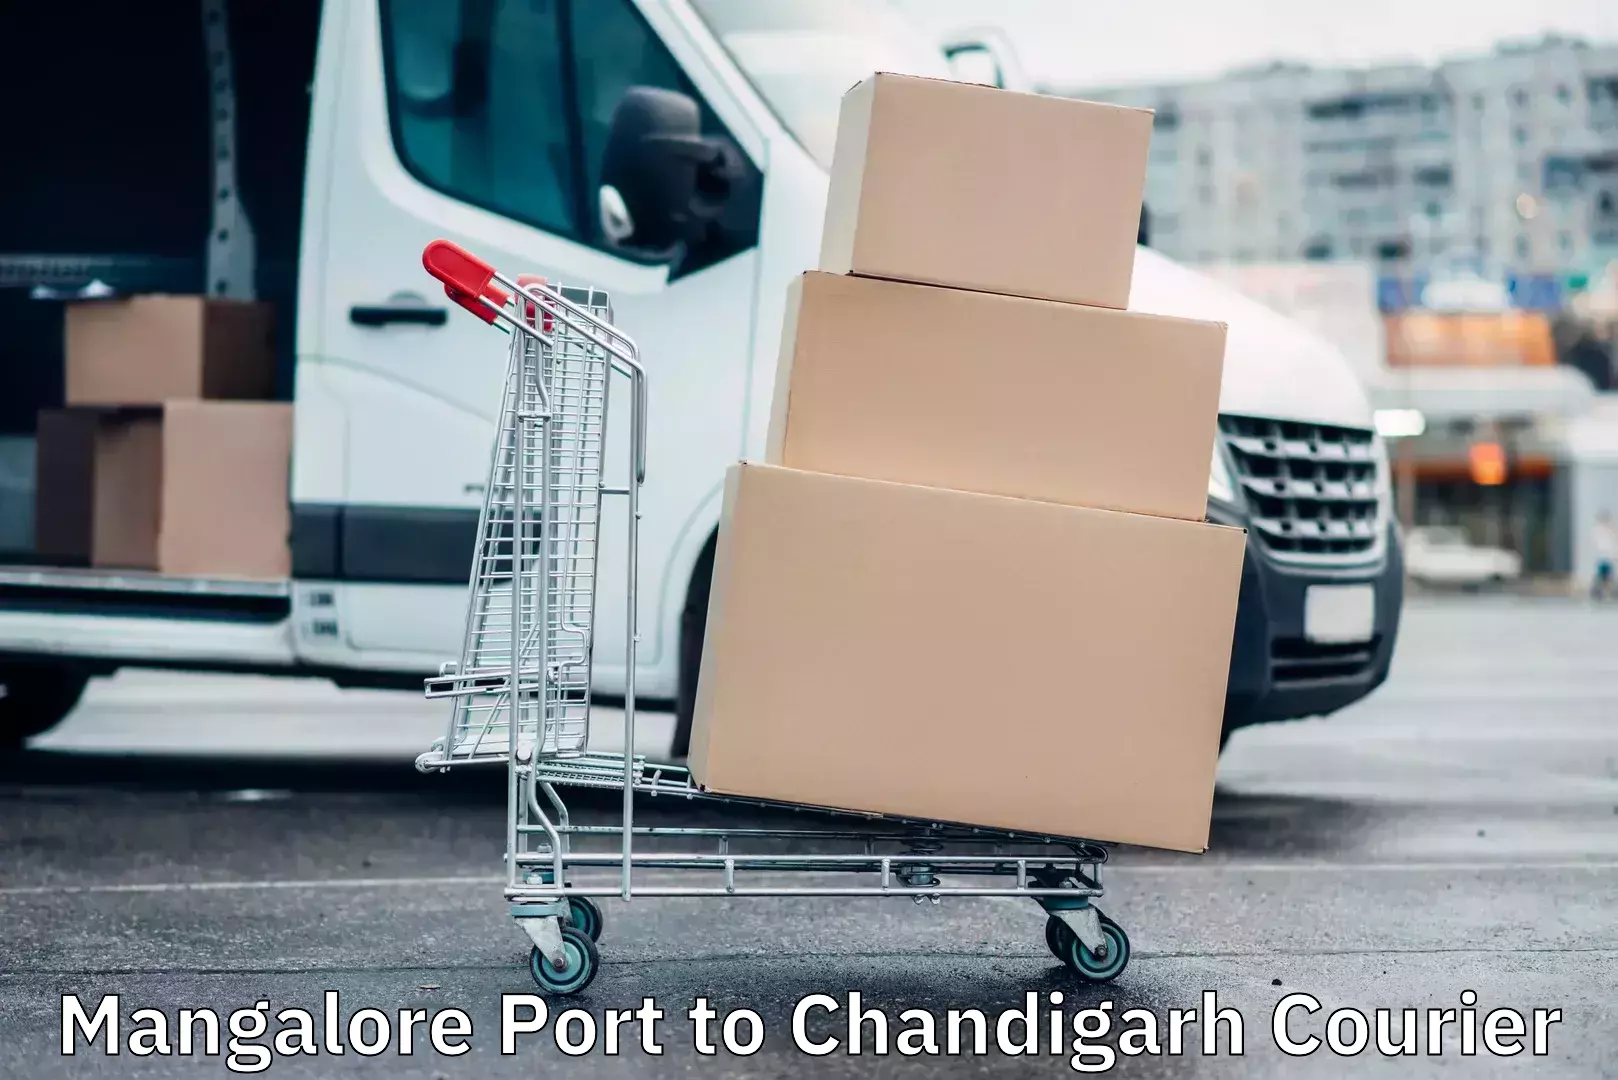 Personal courier services Mangalore Port to Chandigarh